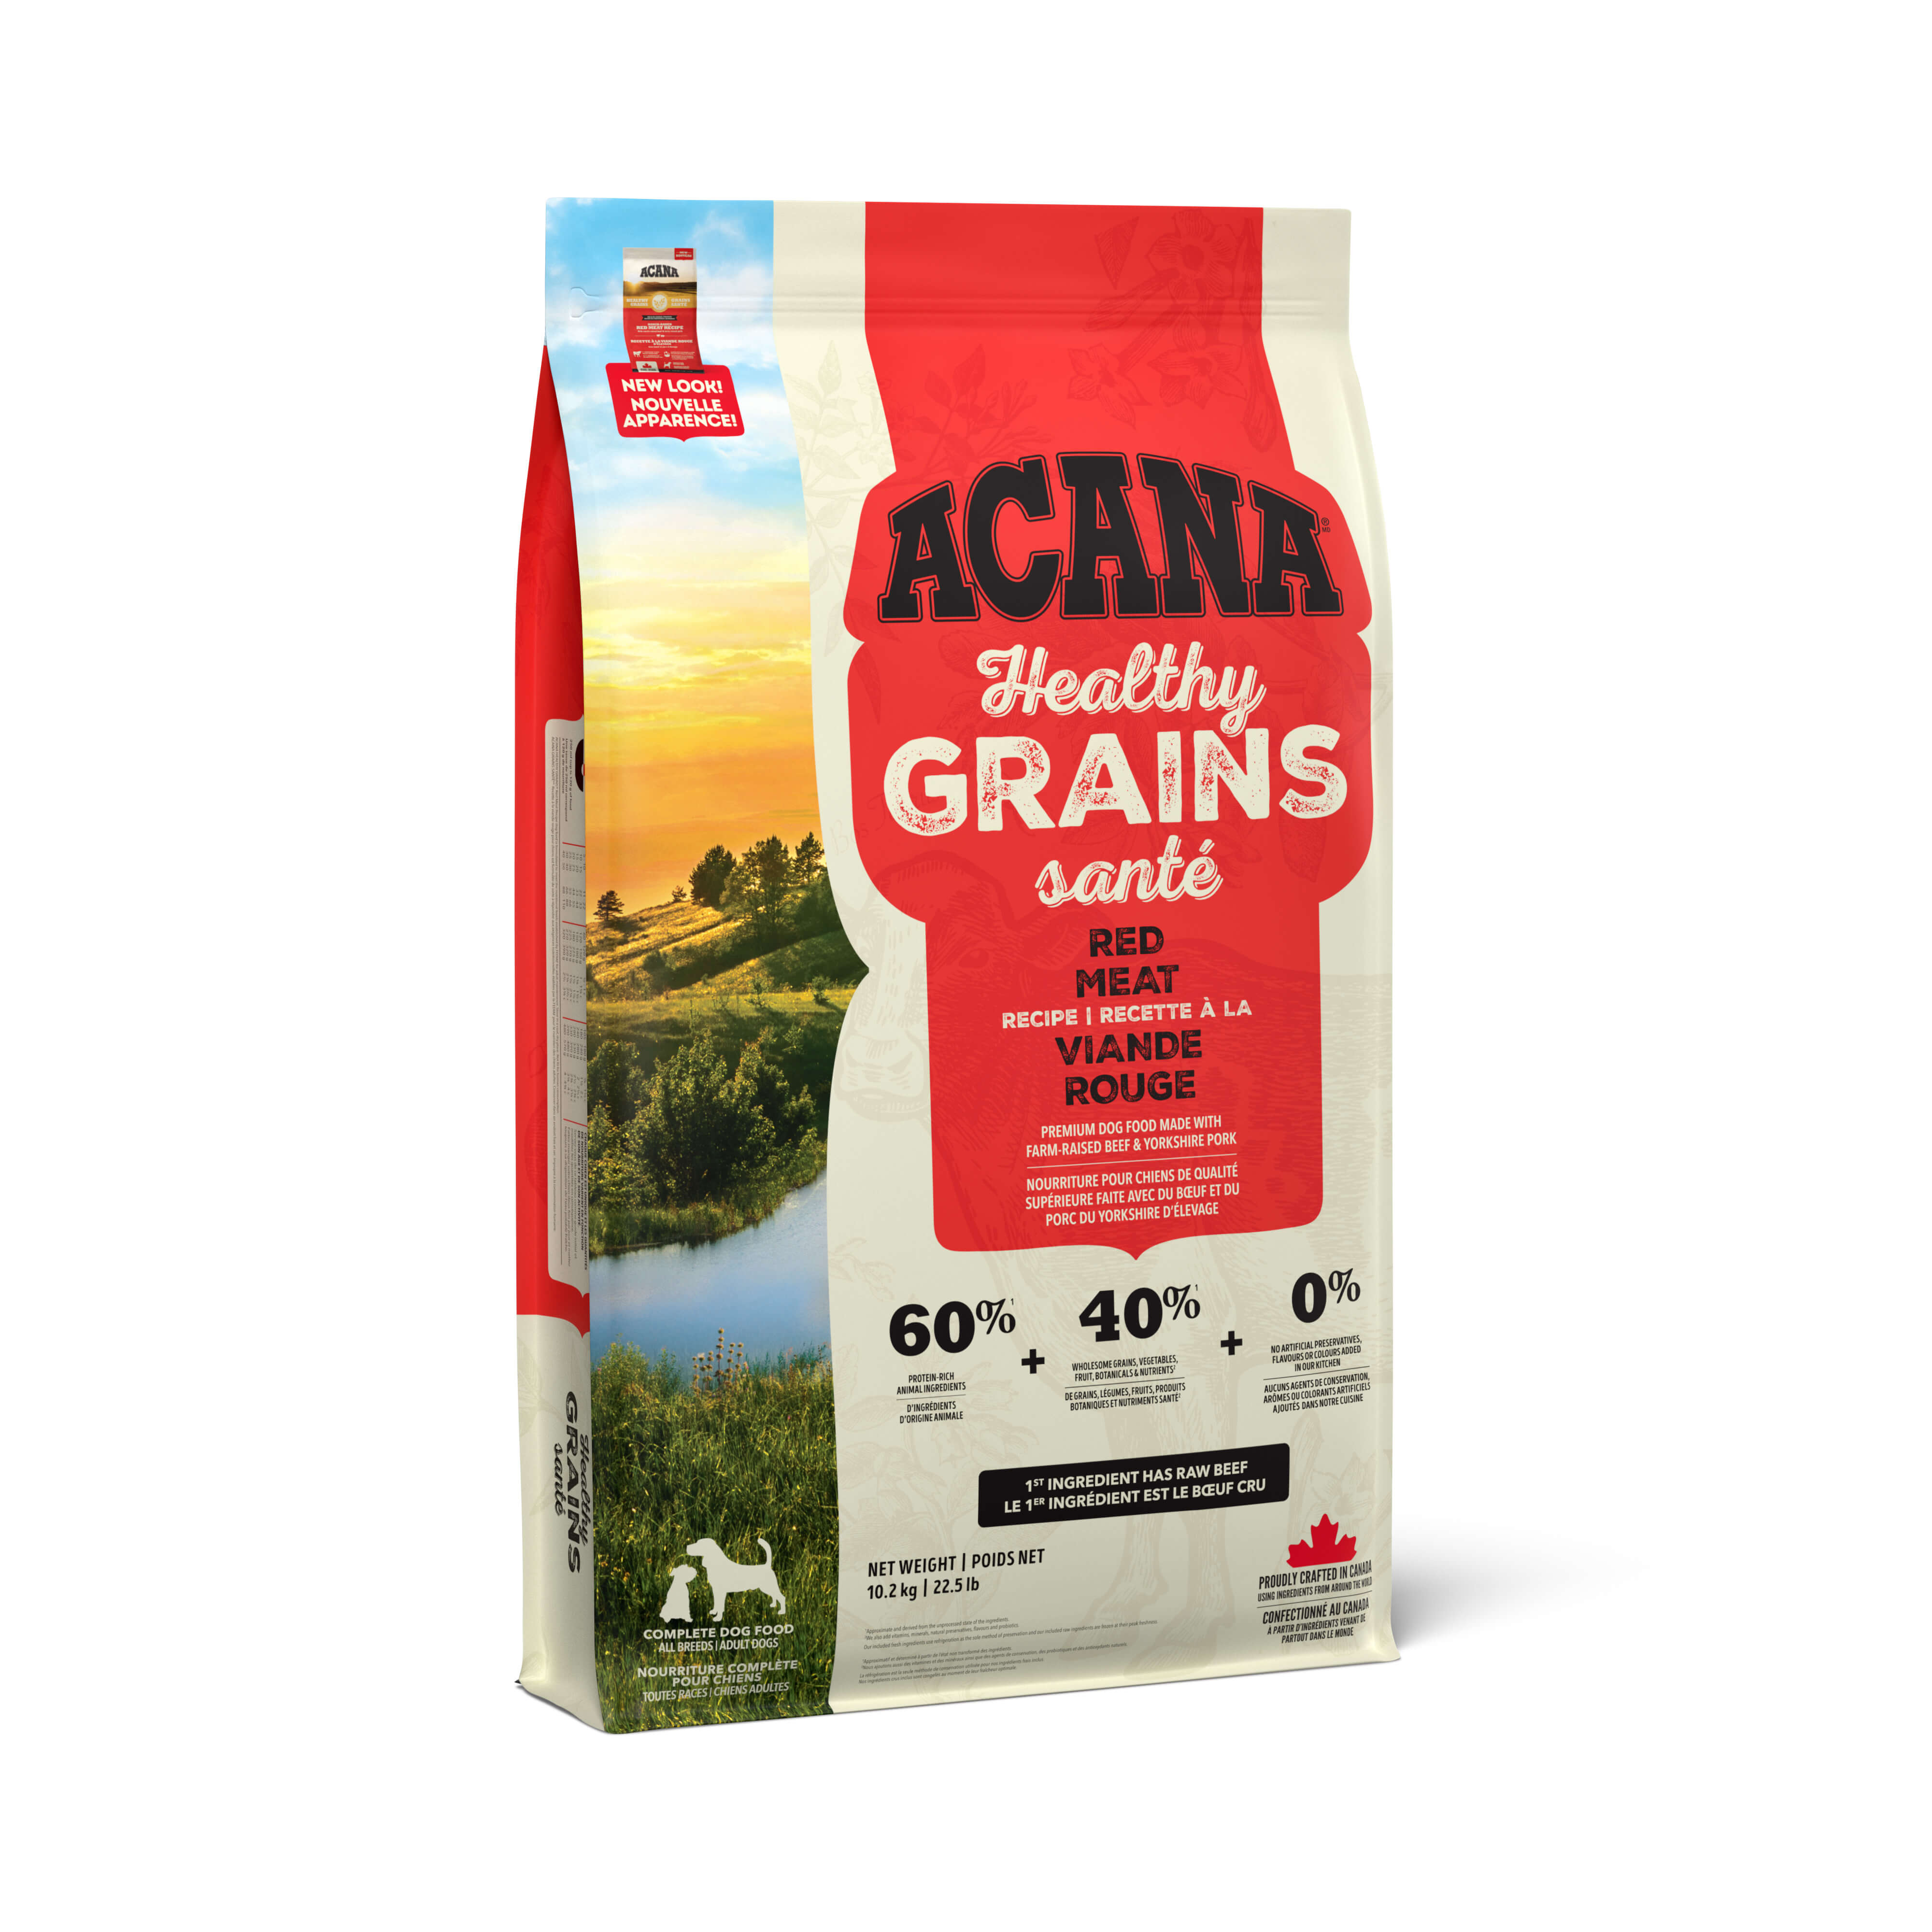 Acana - Healthy Grains - Red Meat Recipe (Dry Dog Food)